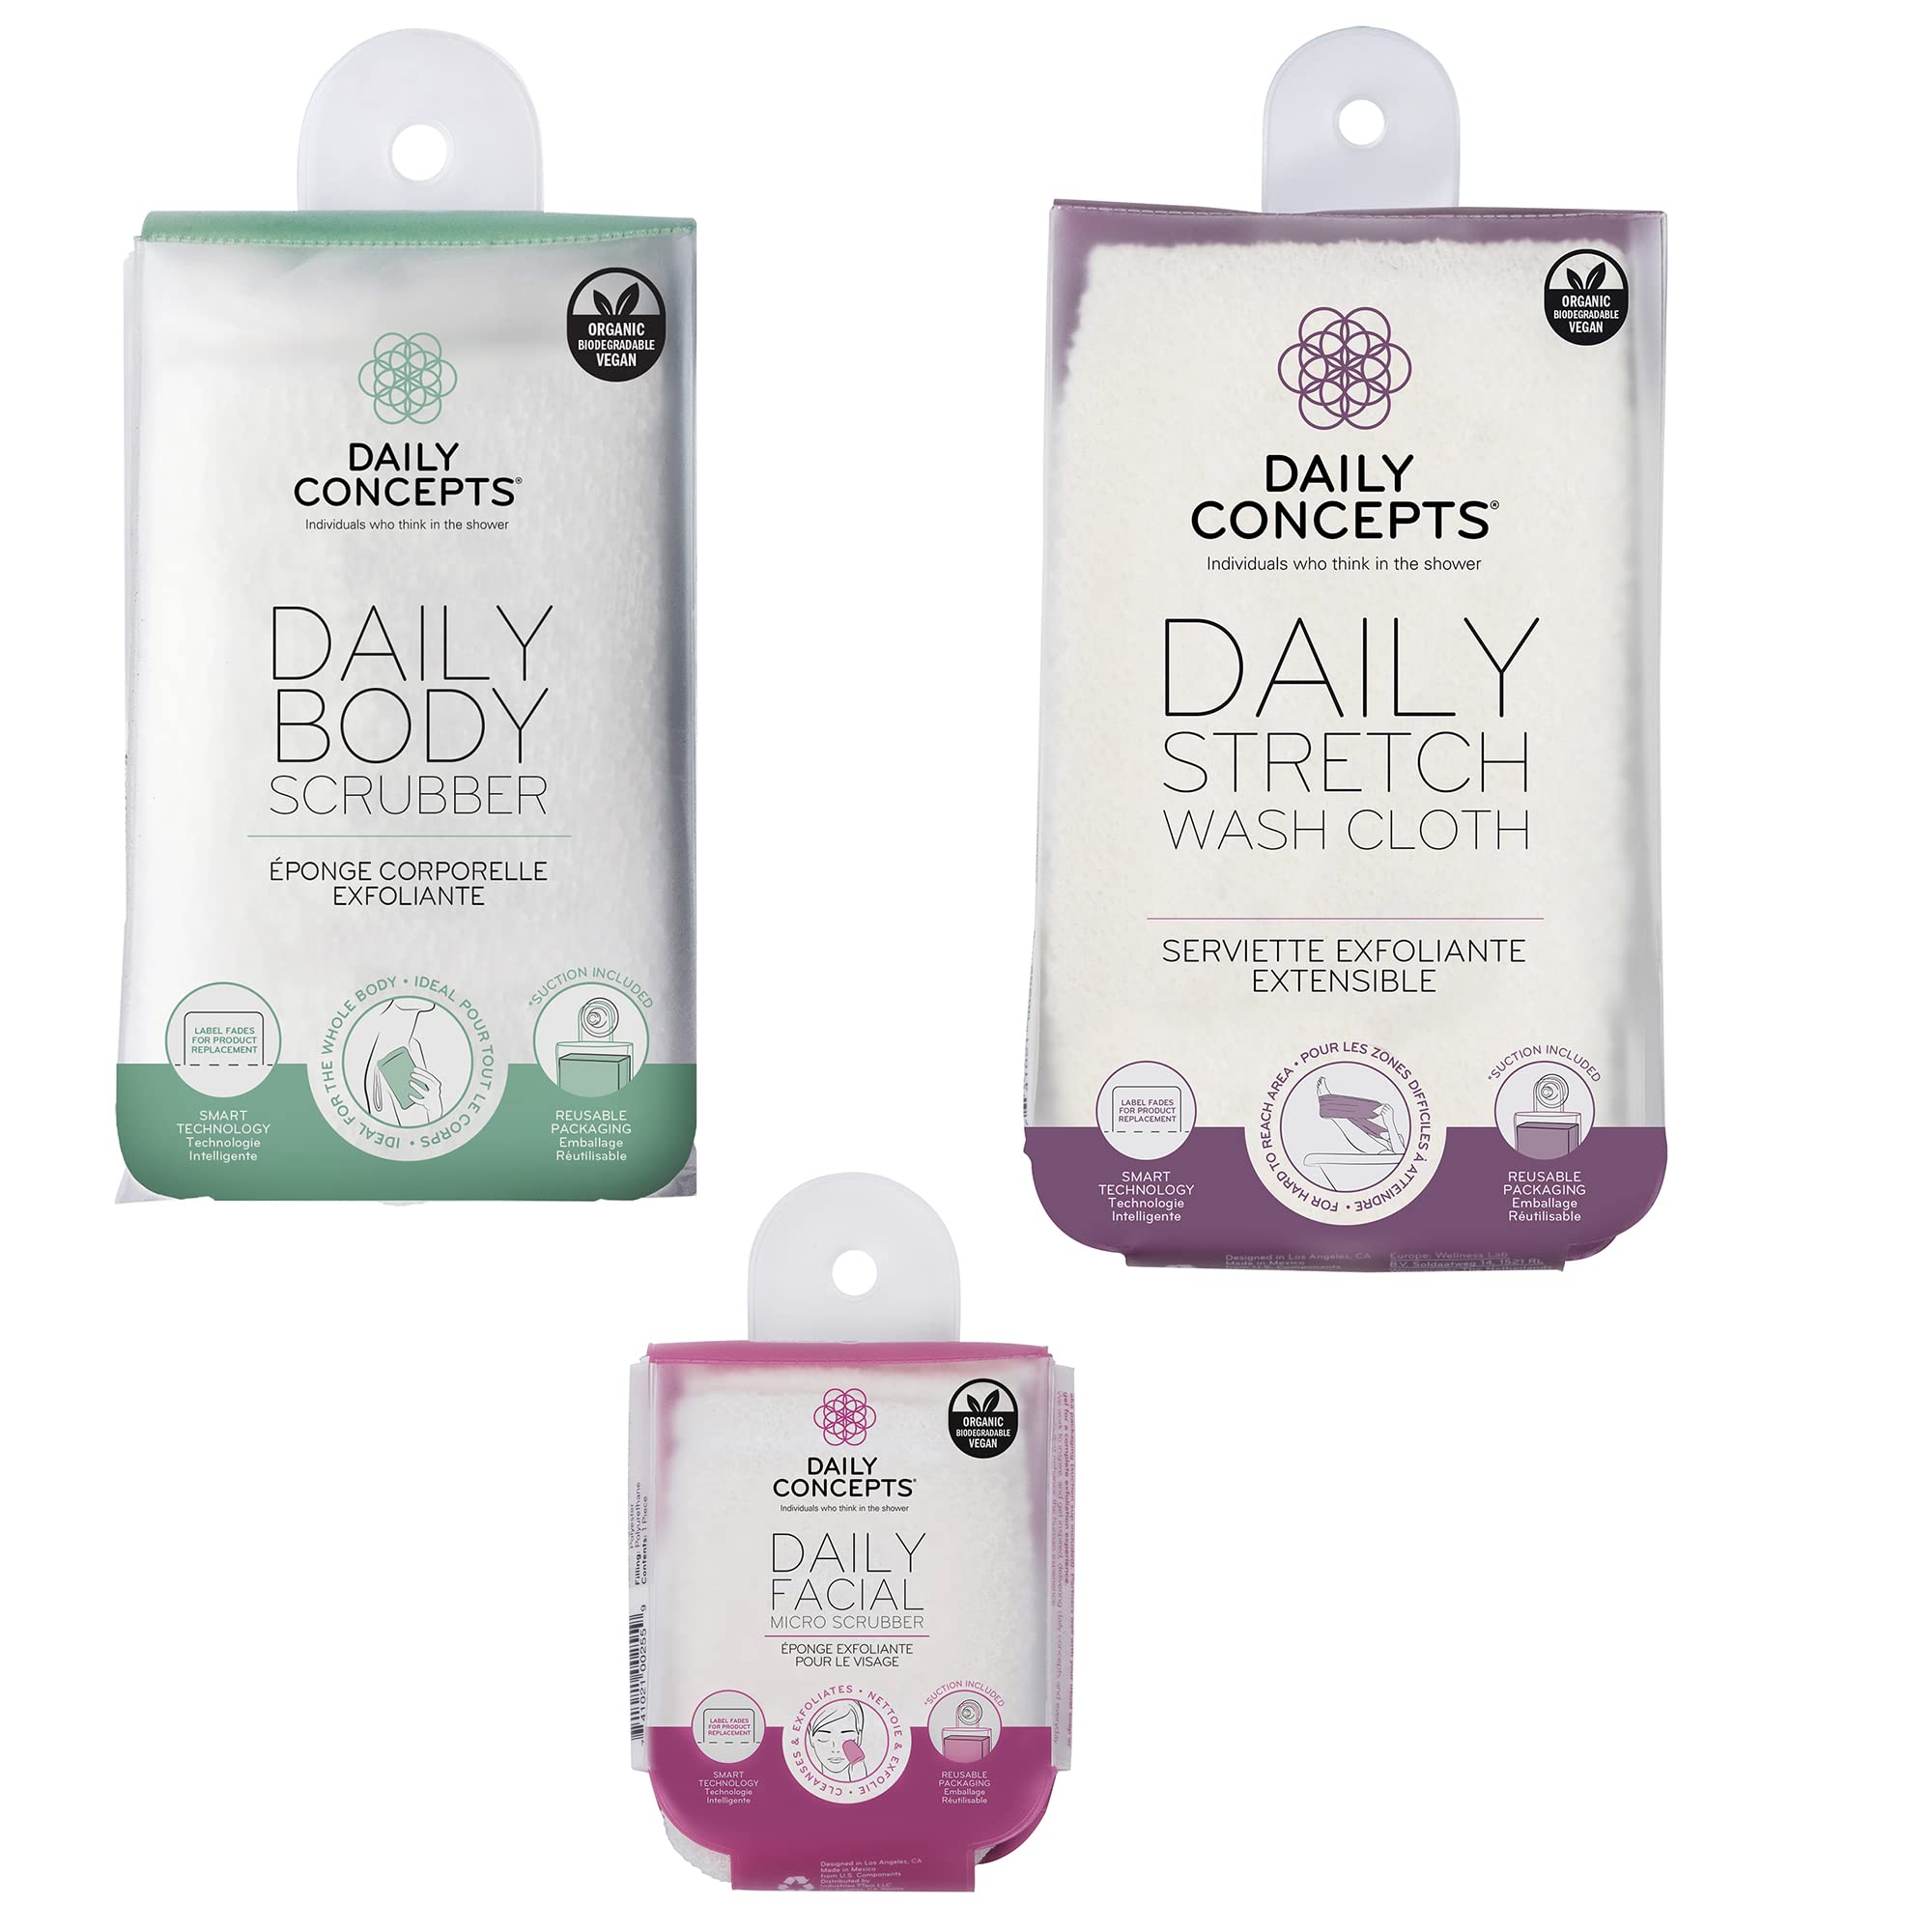 Daily Body Scrubber - Daily Facial Micro Scrubber - Daily Stretch Wash Cloth